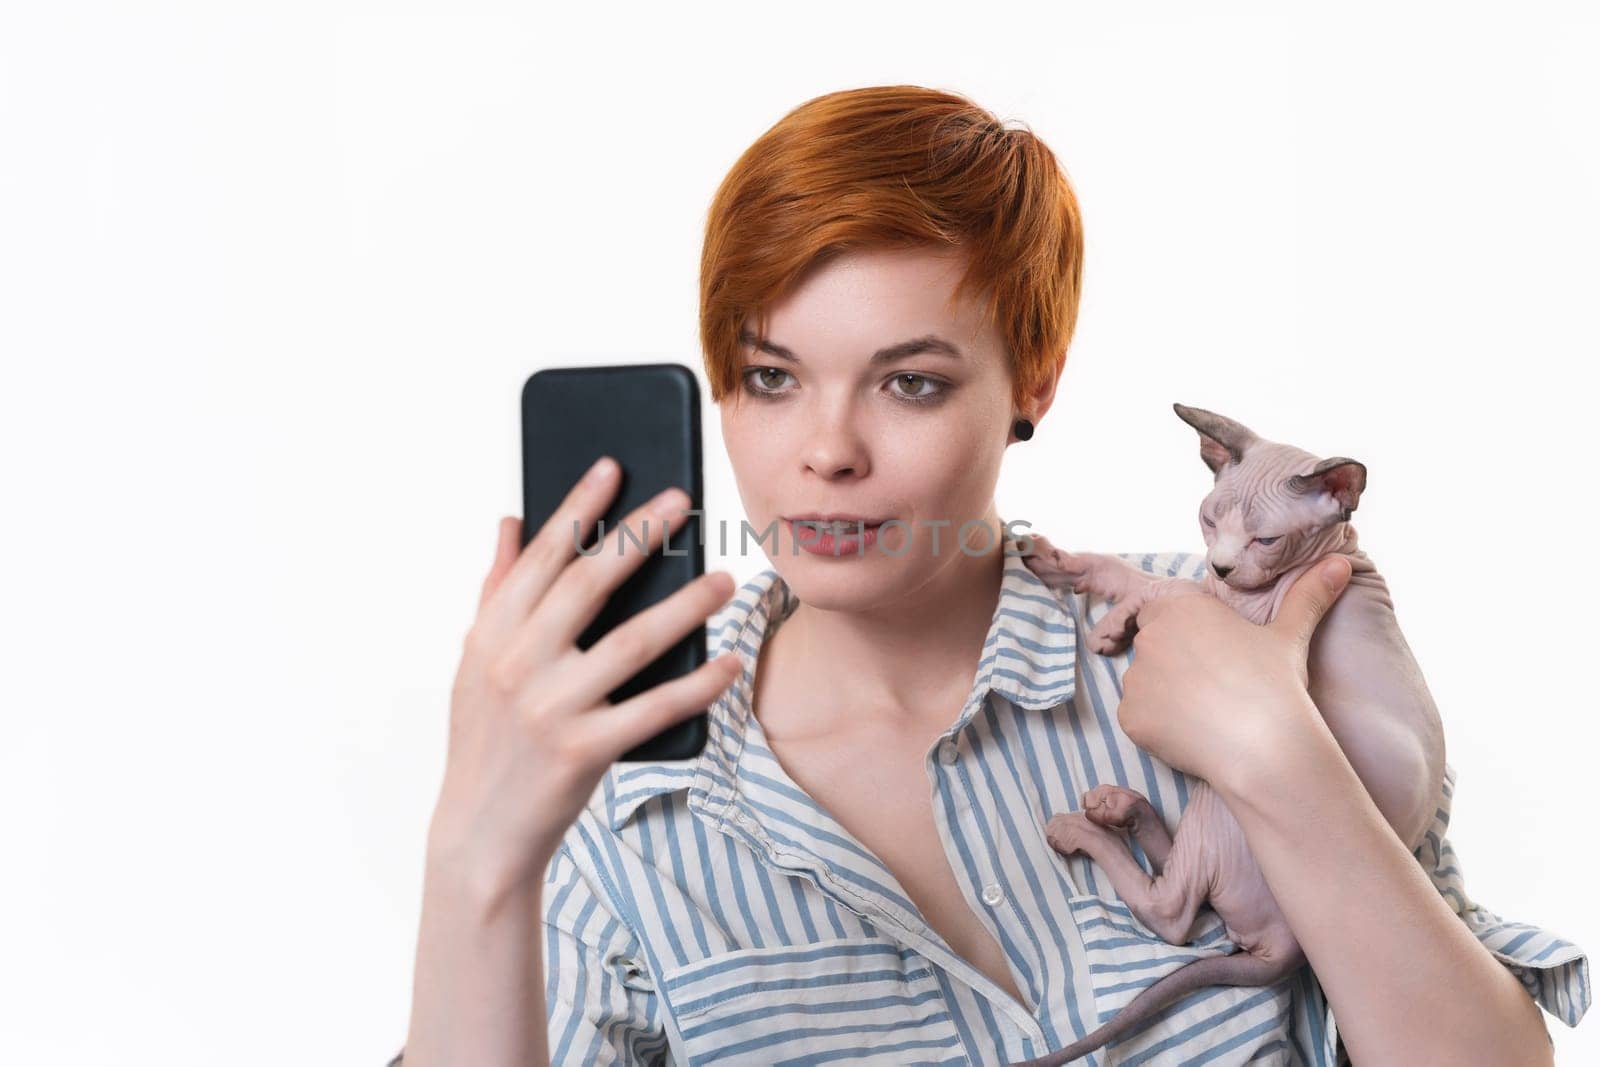 Redhead young woman hugging cat, having video-call holding smart phone in hand shooting selfie on camera. Studio shot on white background. Hipster in striped white-blue shirt. Part of series.